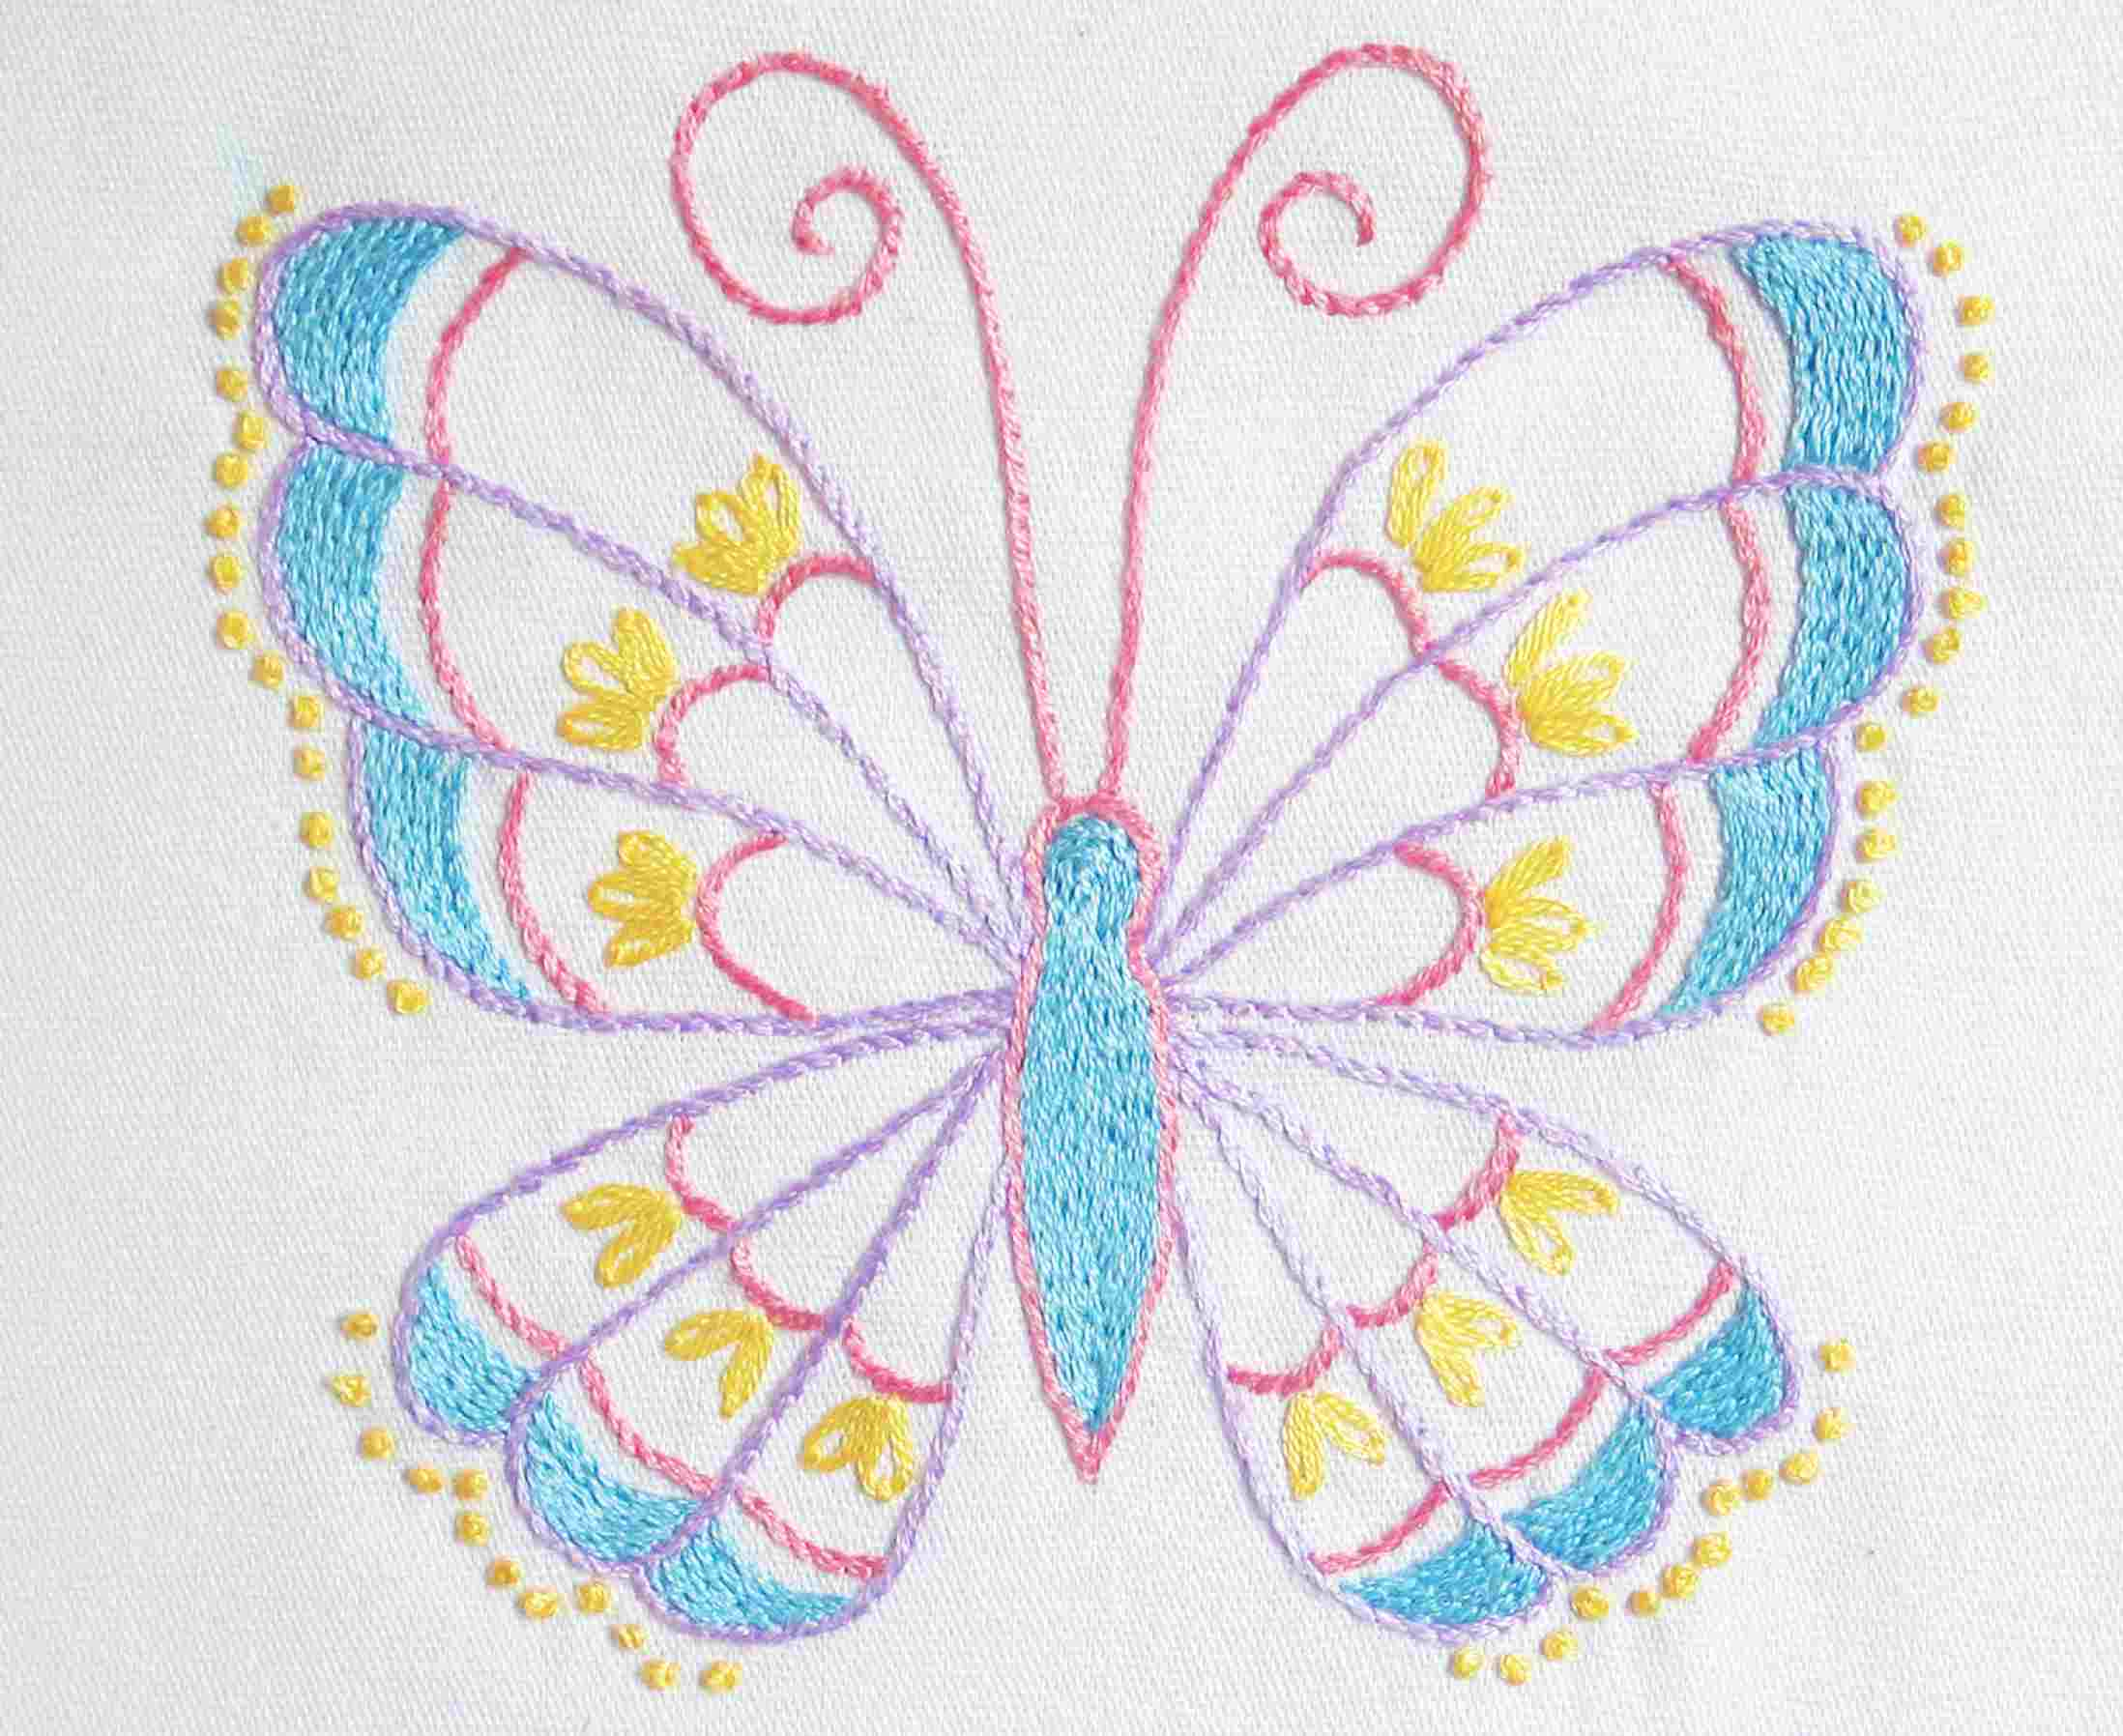 Cool Embroidery Patterns Our Top 25 Free Embroidery Designs